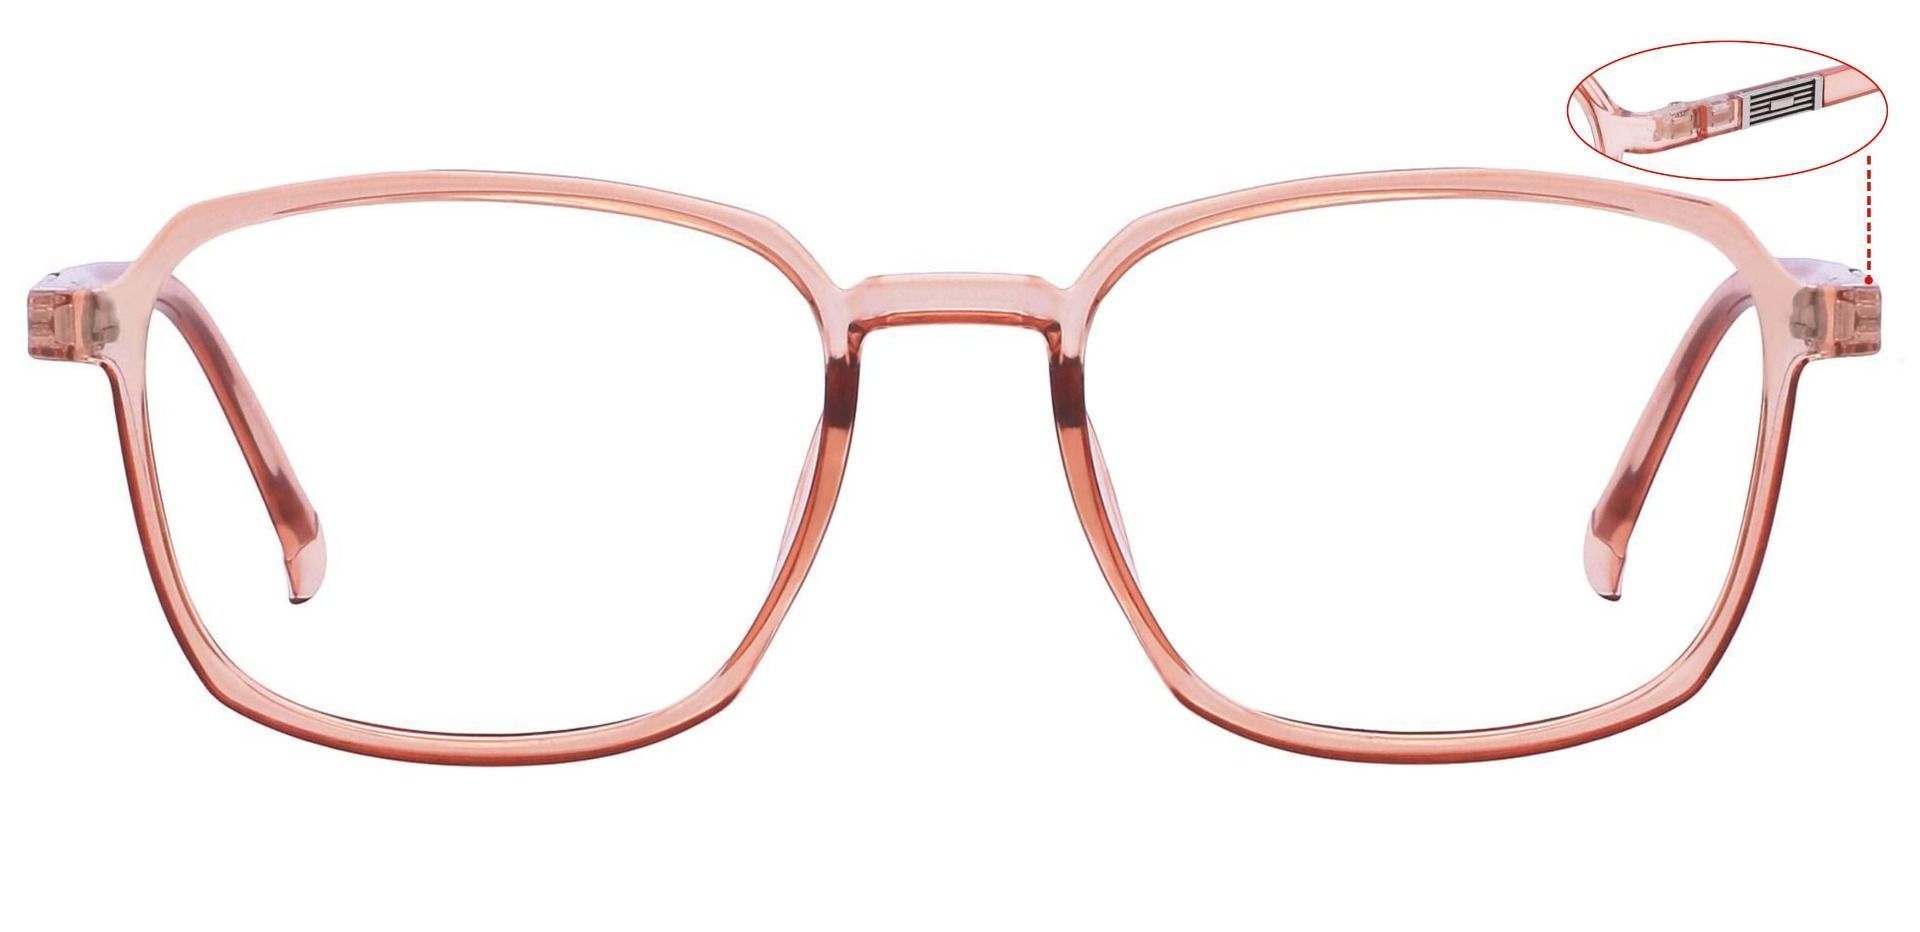 Stella Square Blue Light Blocking Glasses - The Frame Is Red And Clear